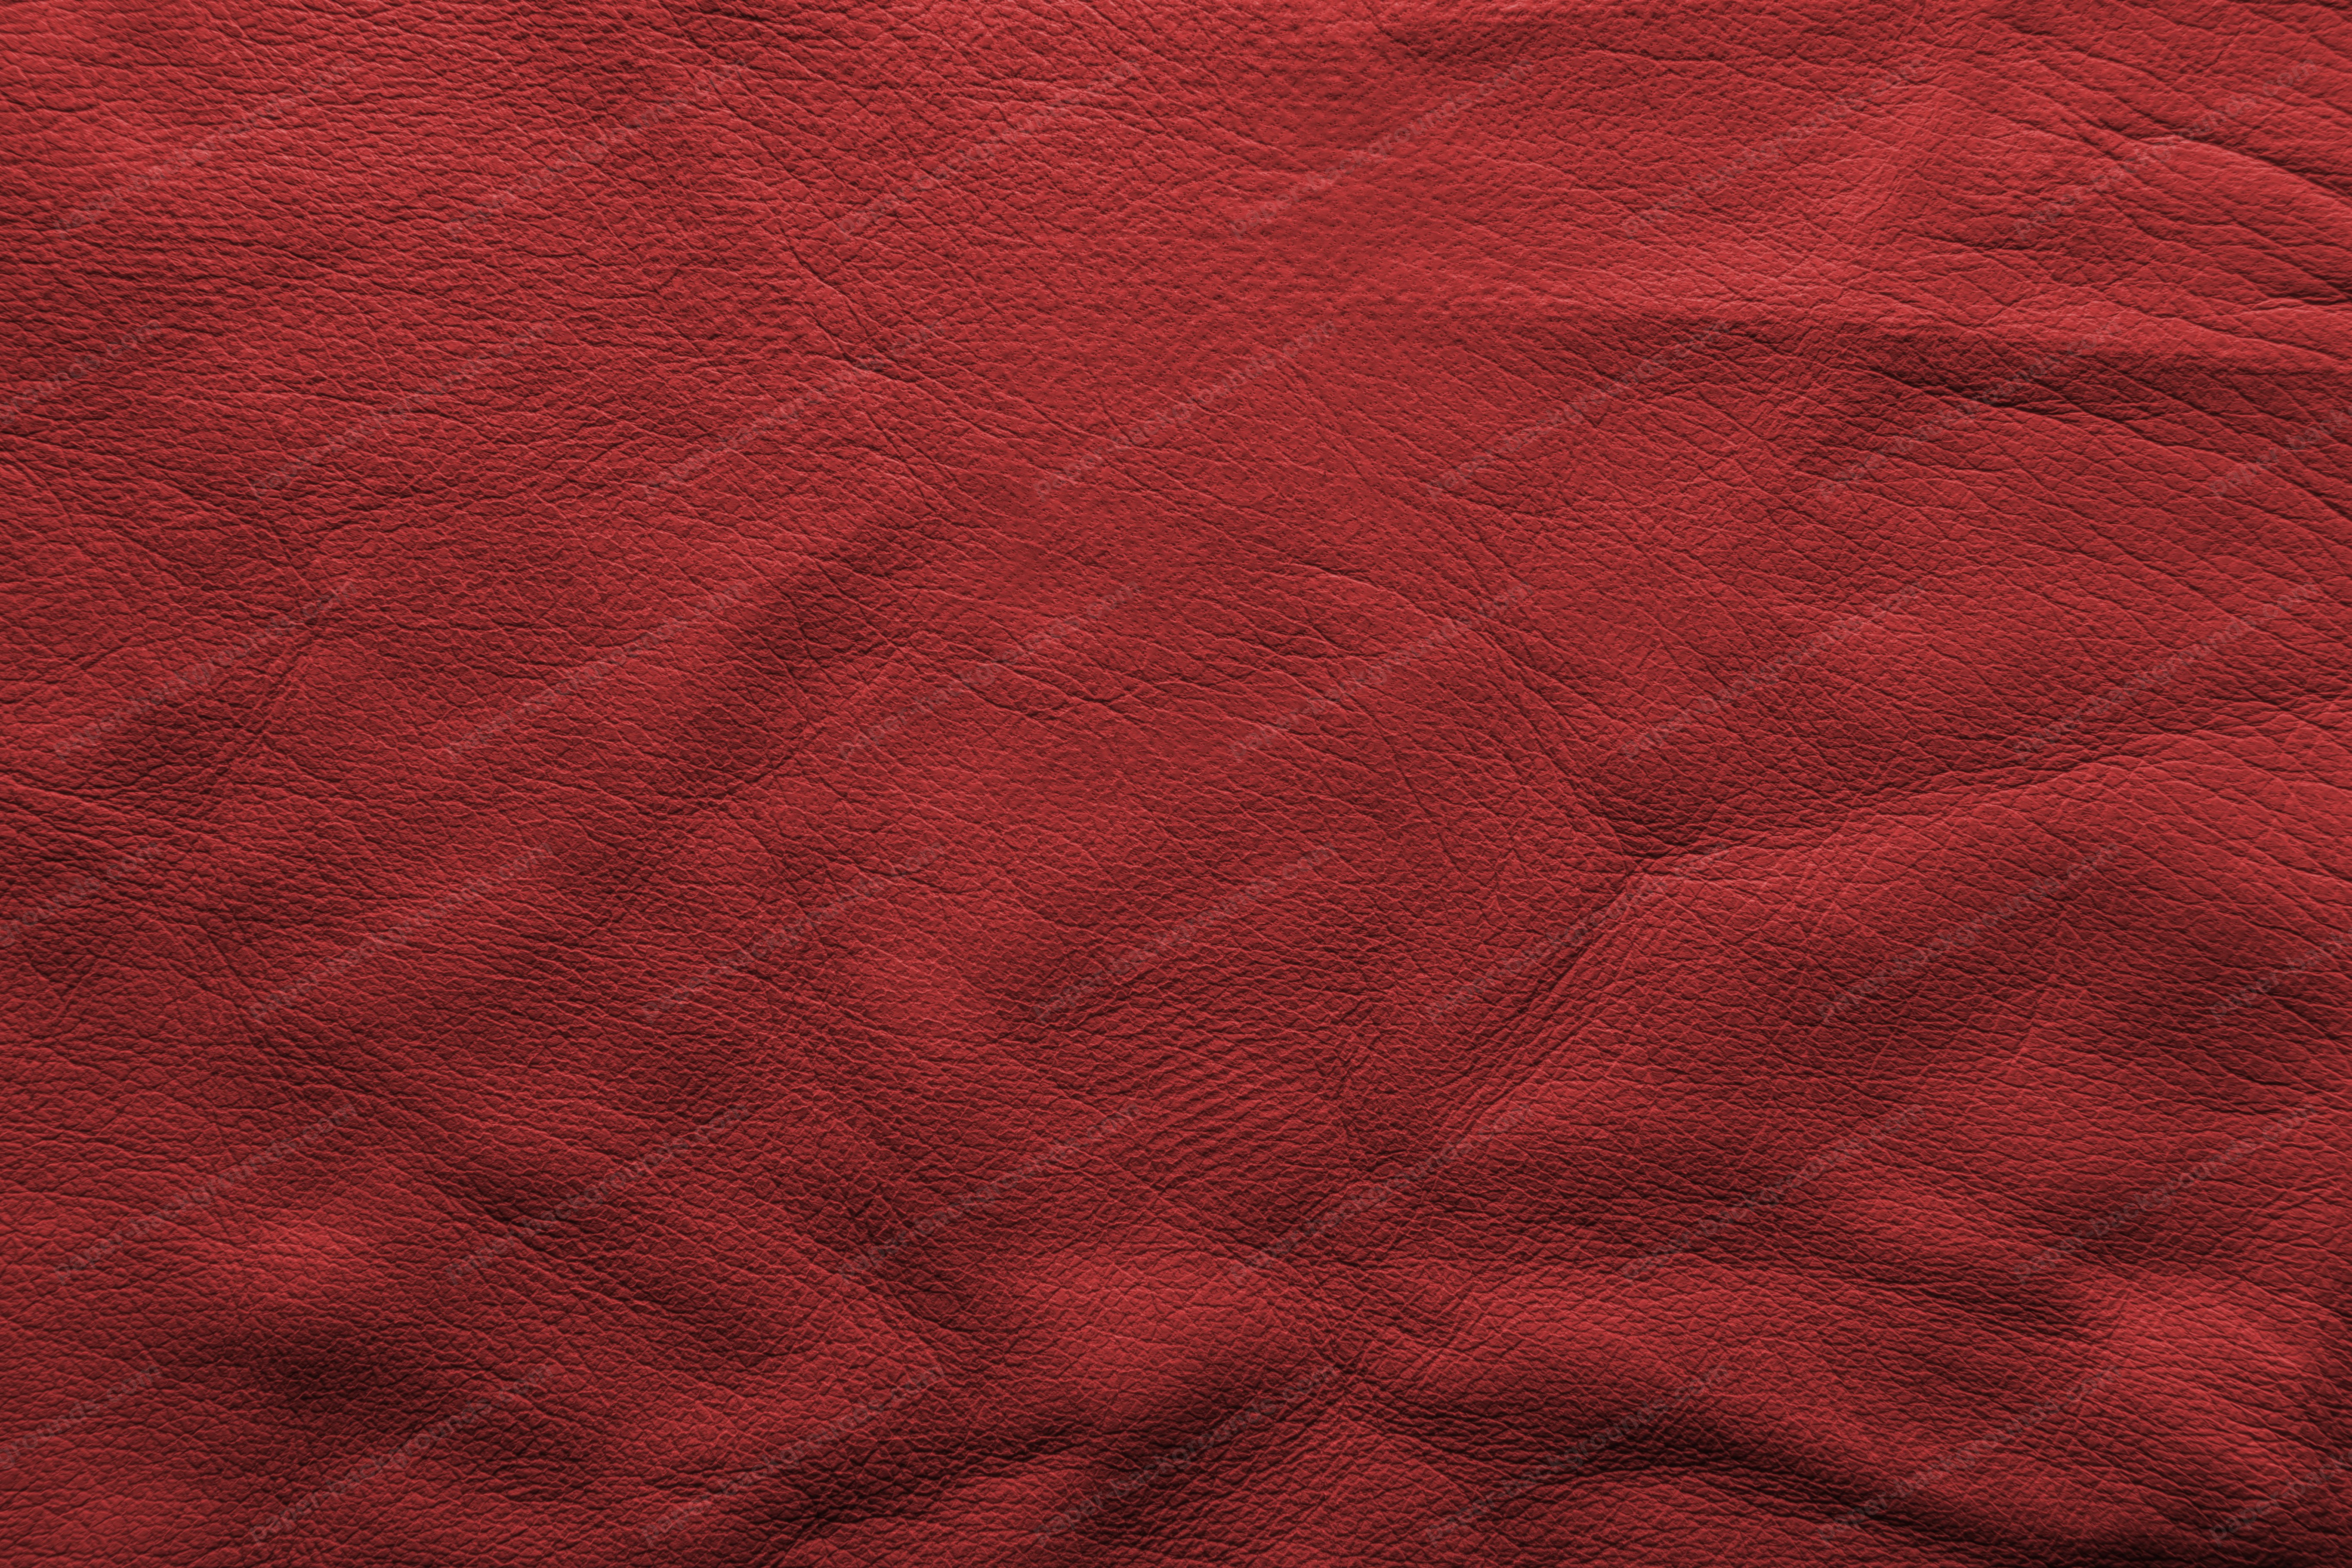 Paper Backgrounds Red Vintage Soft Leather Background